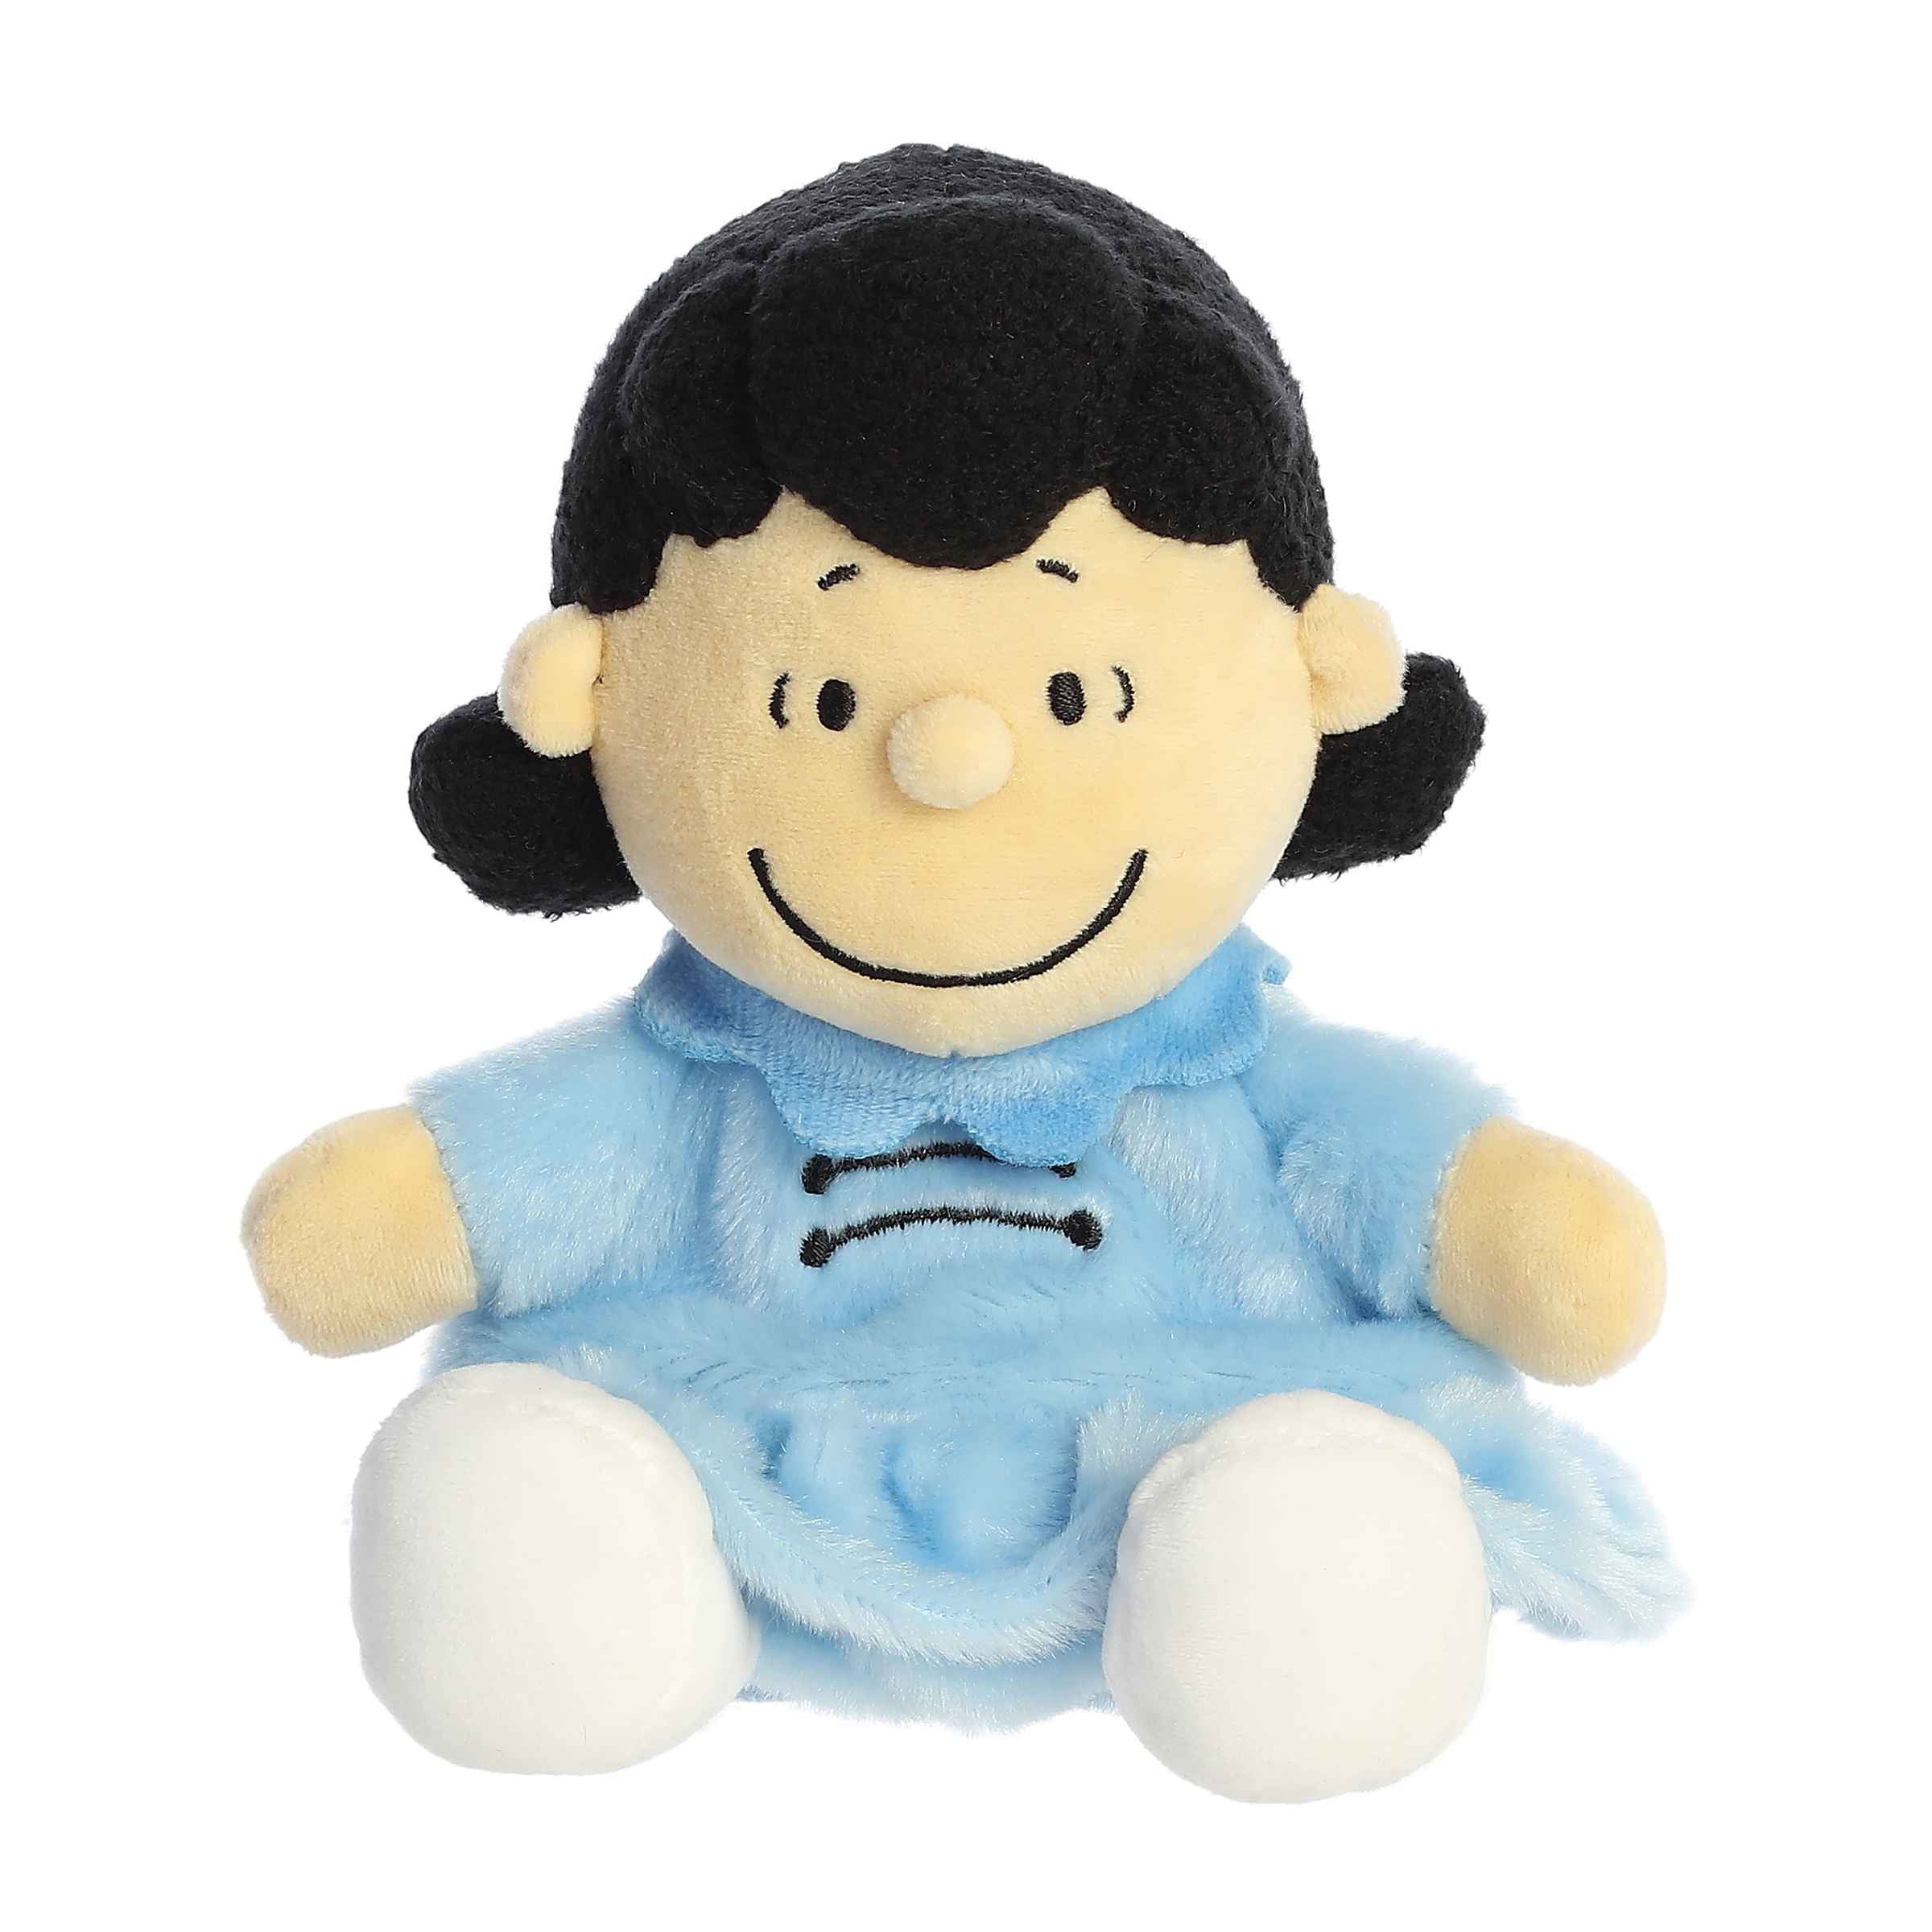 Lucy Palm Pals plush from the Peanuts collection in blue dress, embodies bold character, perfect for cuddles